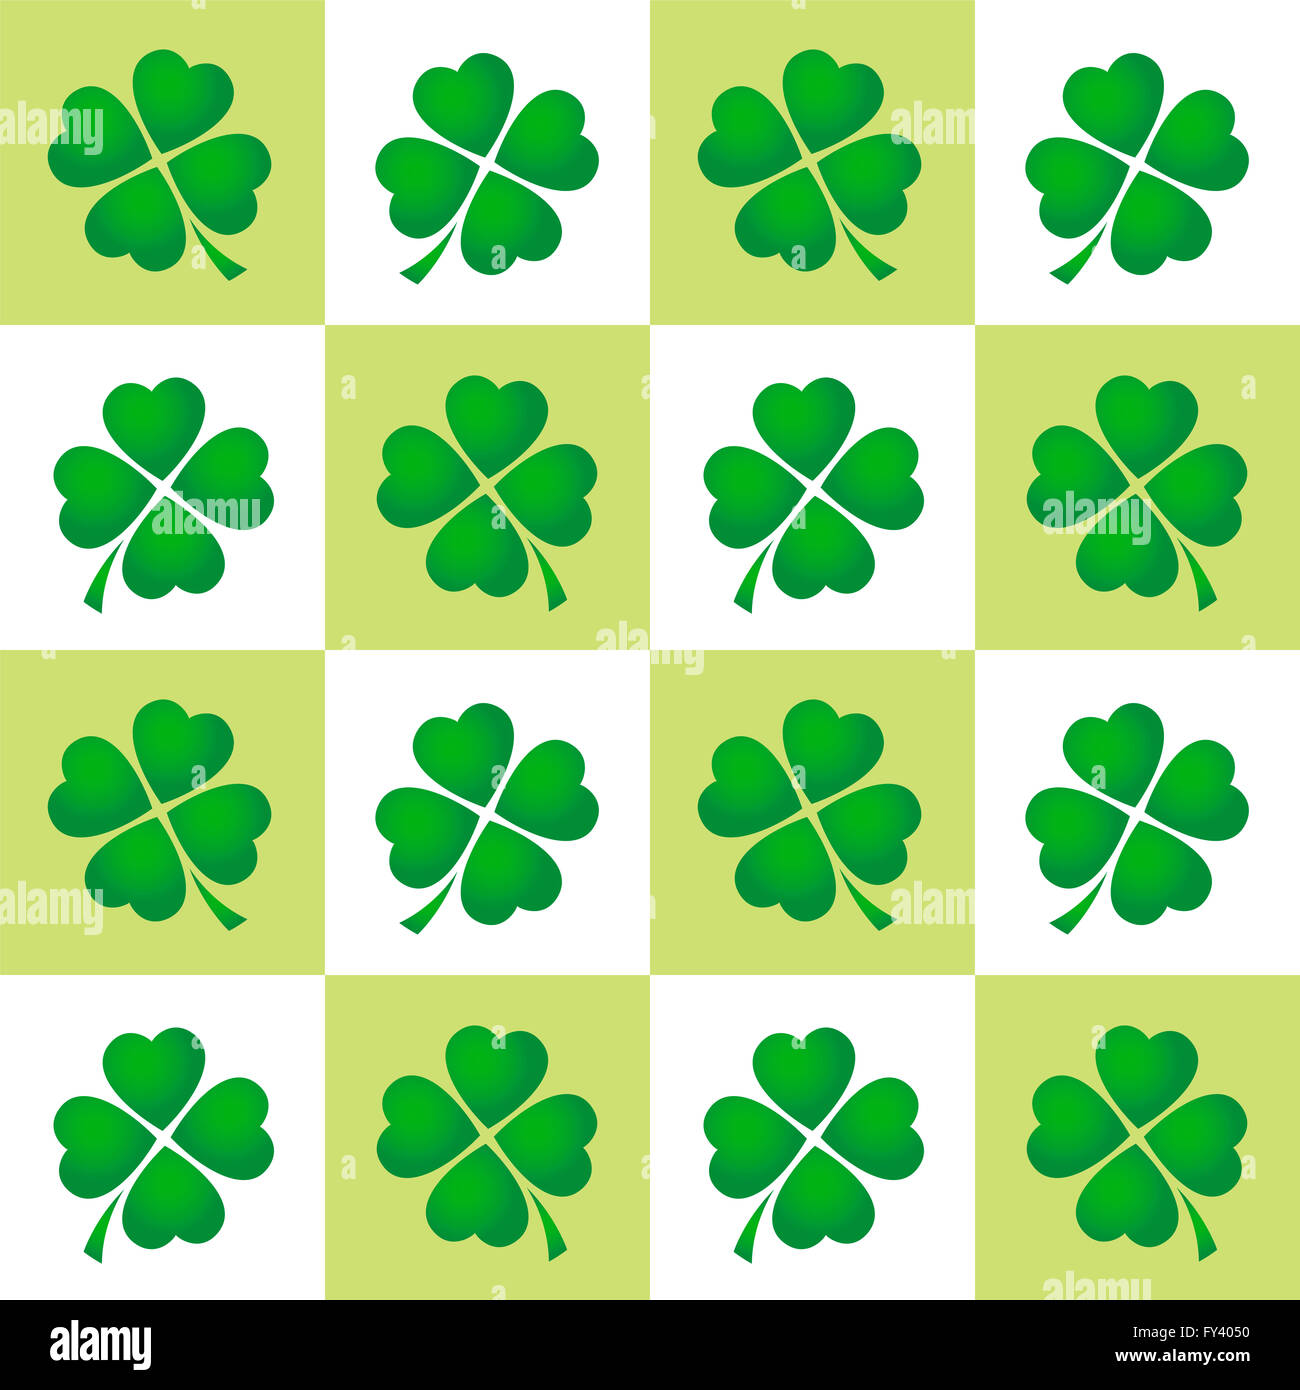 Shamrock tiles pattern - four leaved clovers on green and white square background. Stock Photo